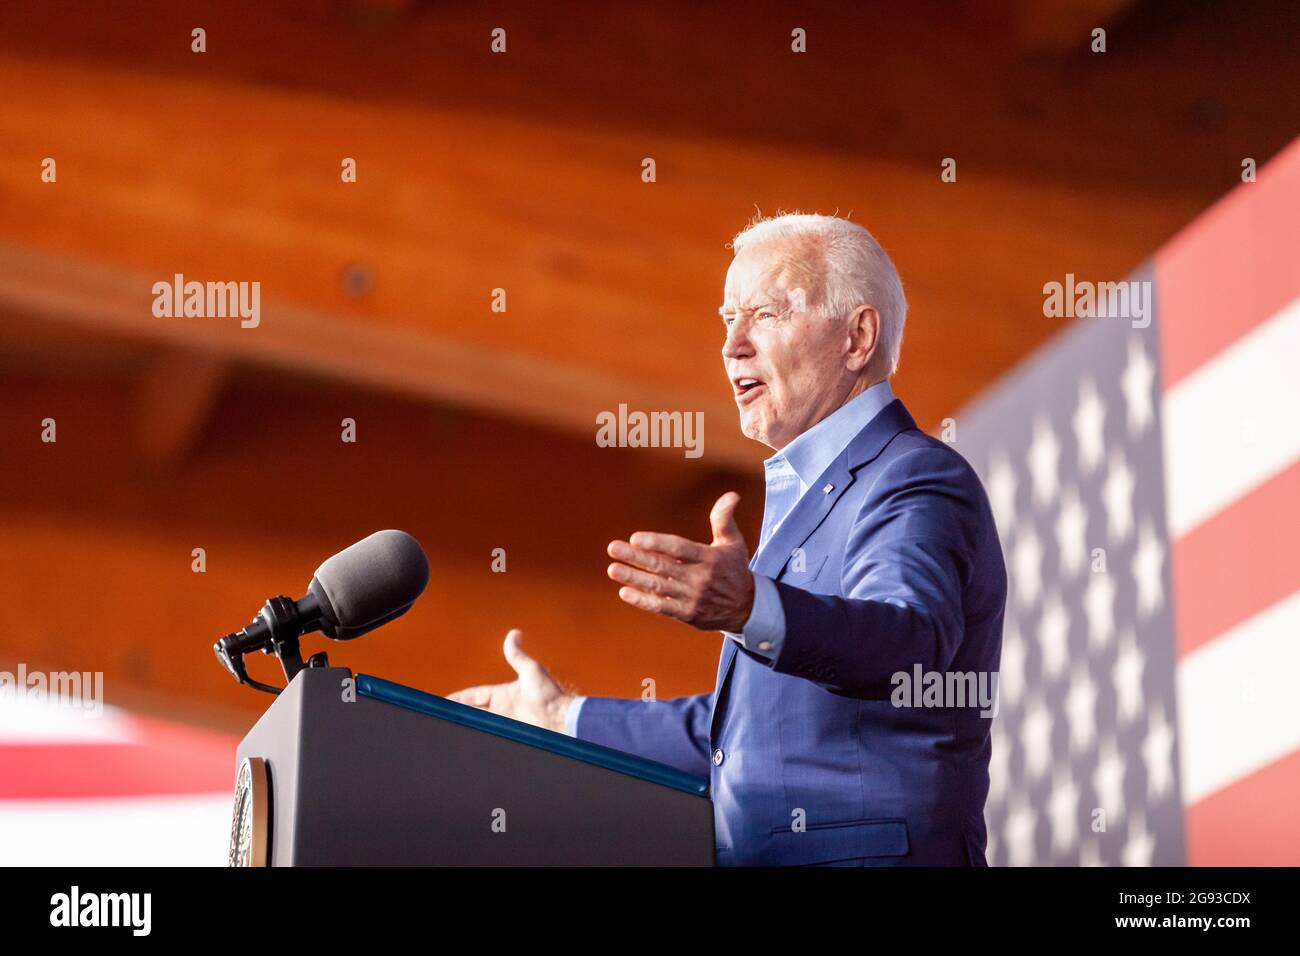 Virginia, USA. 23rd July, 2021. President Joe Biden speaks at a campaign rally for McAuliffe in his bid to be Virginia's next governor.  This is Biden’s first major appearance in support of a Democratic candidate.  McAuliffe served one term as governor of Virginia and is running for a second term. Credit: Allison Bailey/Alamy Live News Stock Photo